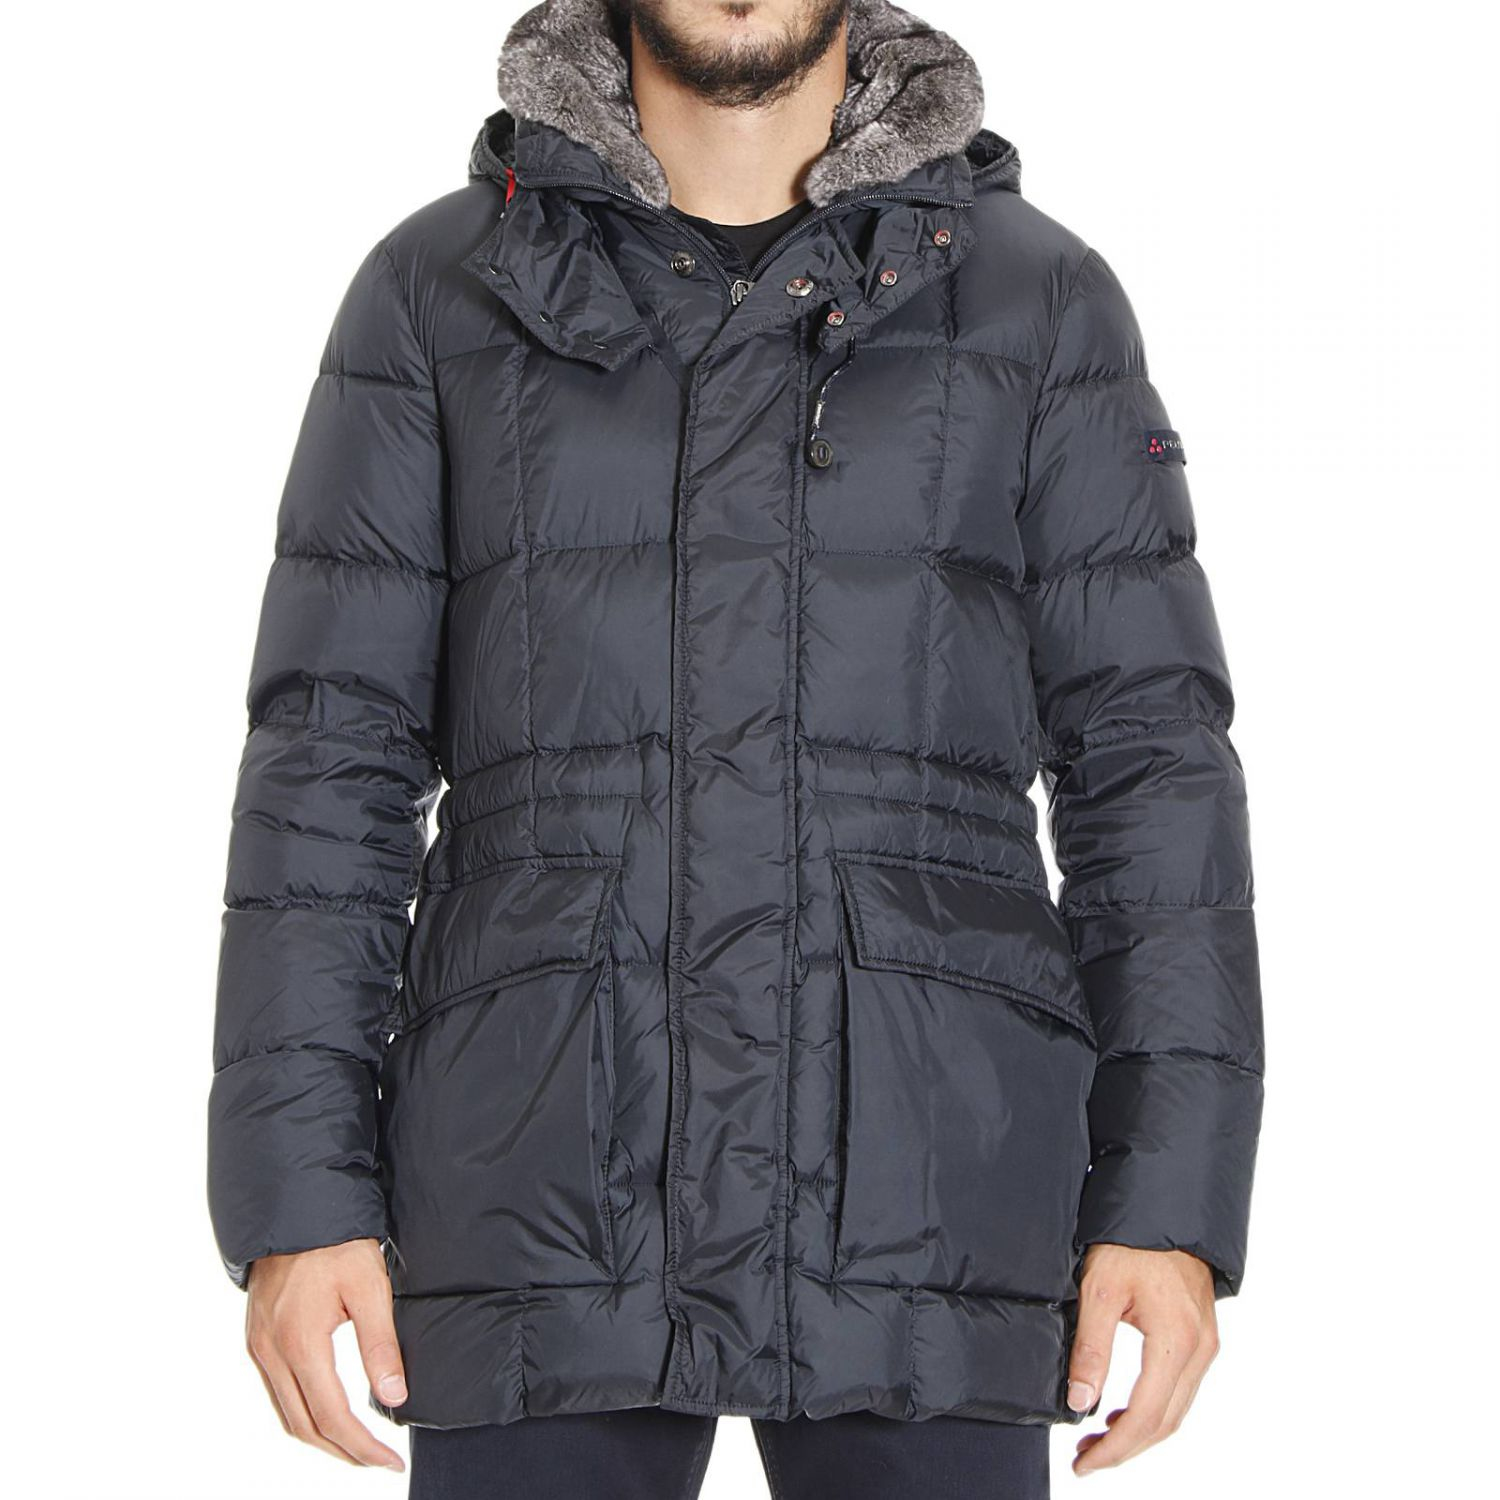 Peuterey Down Jacket in Blue for Men - Lyst